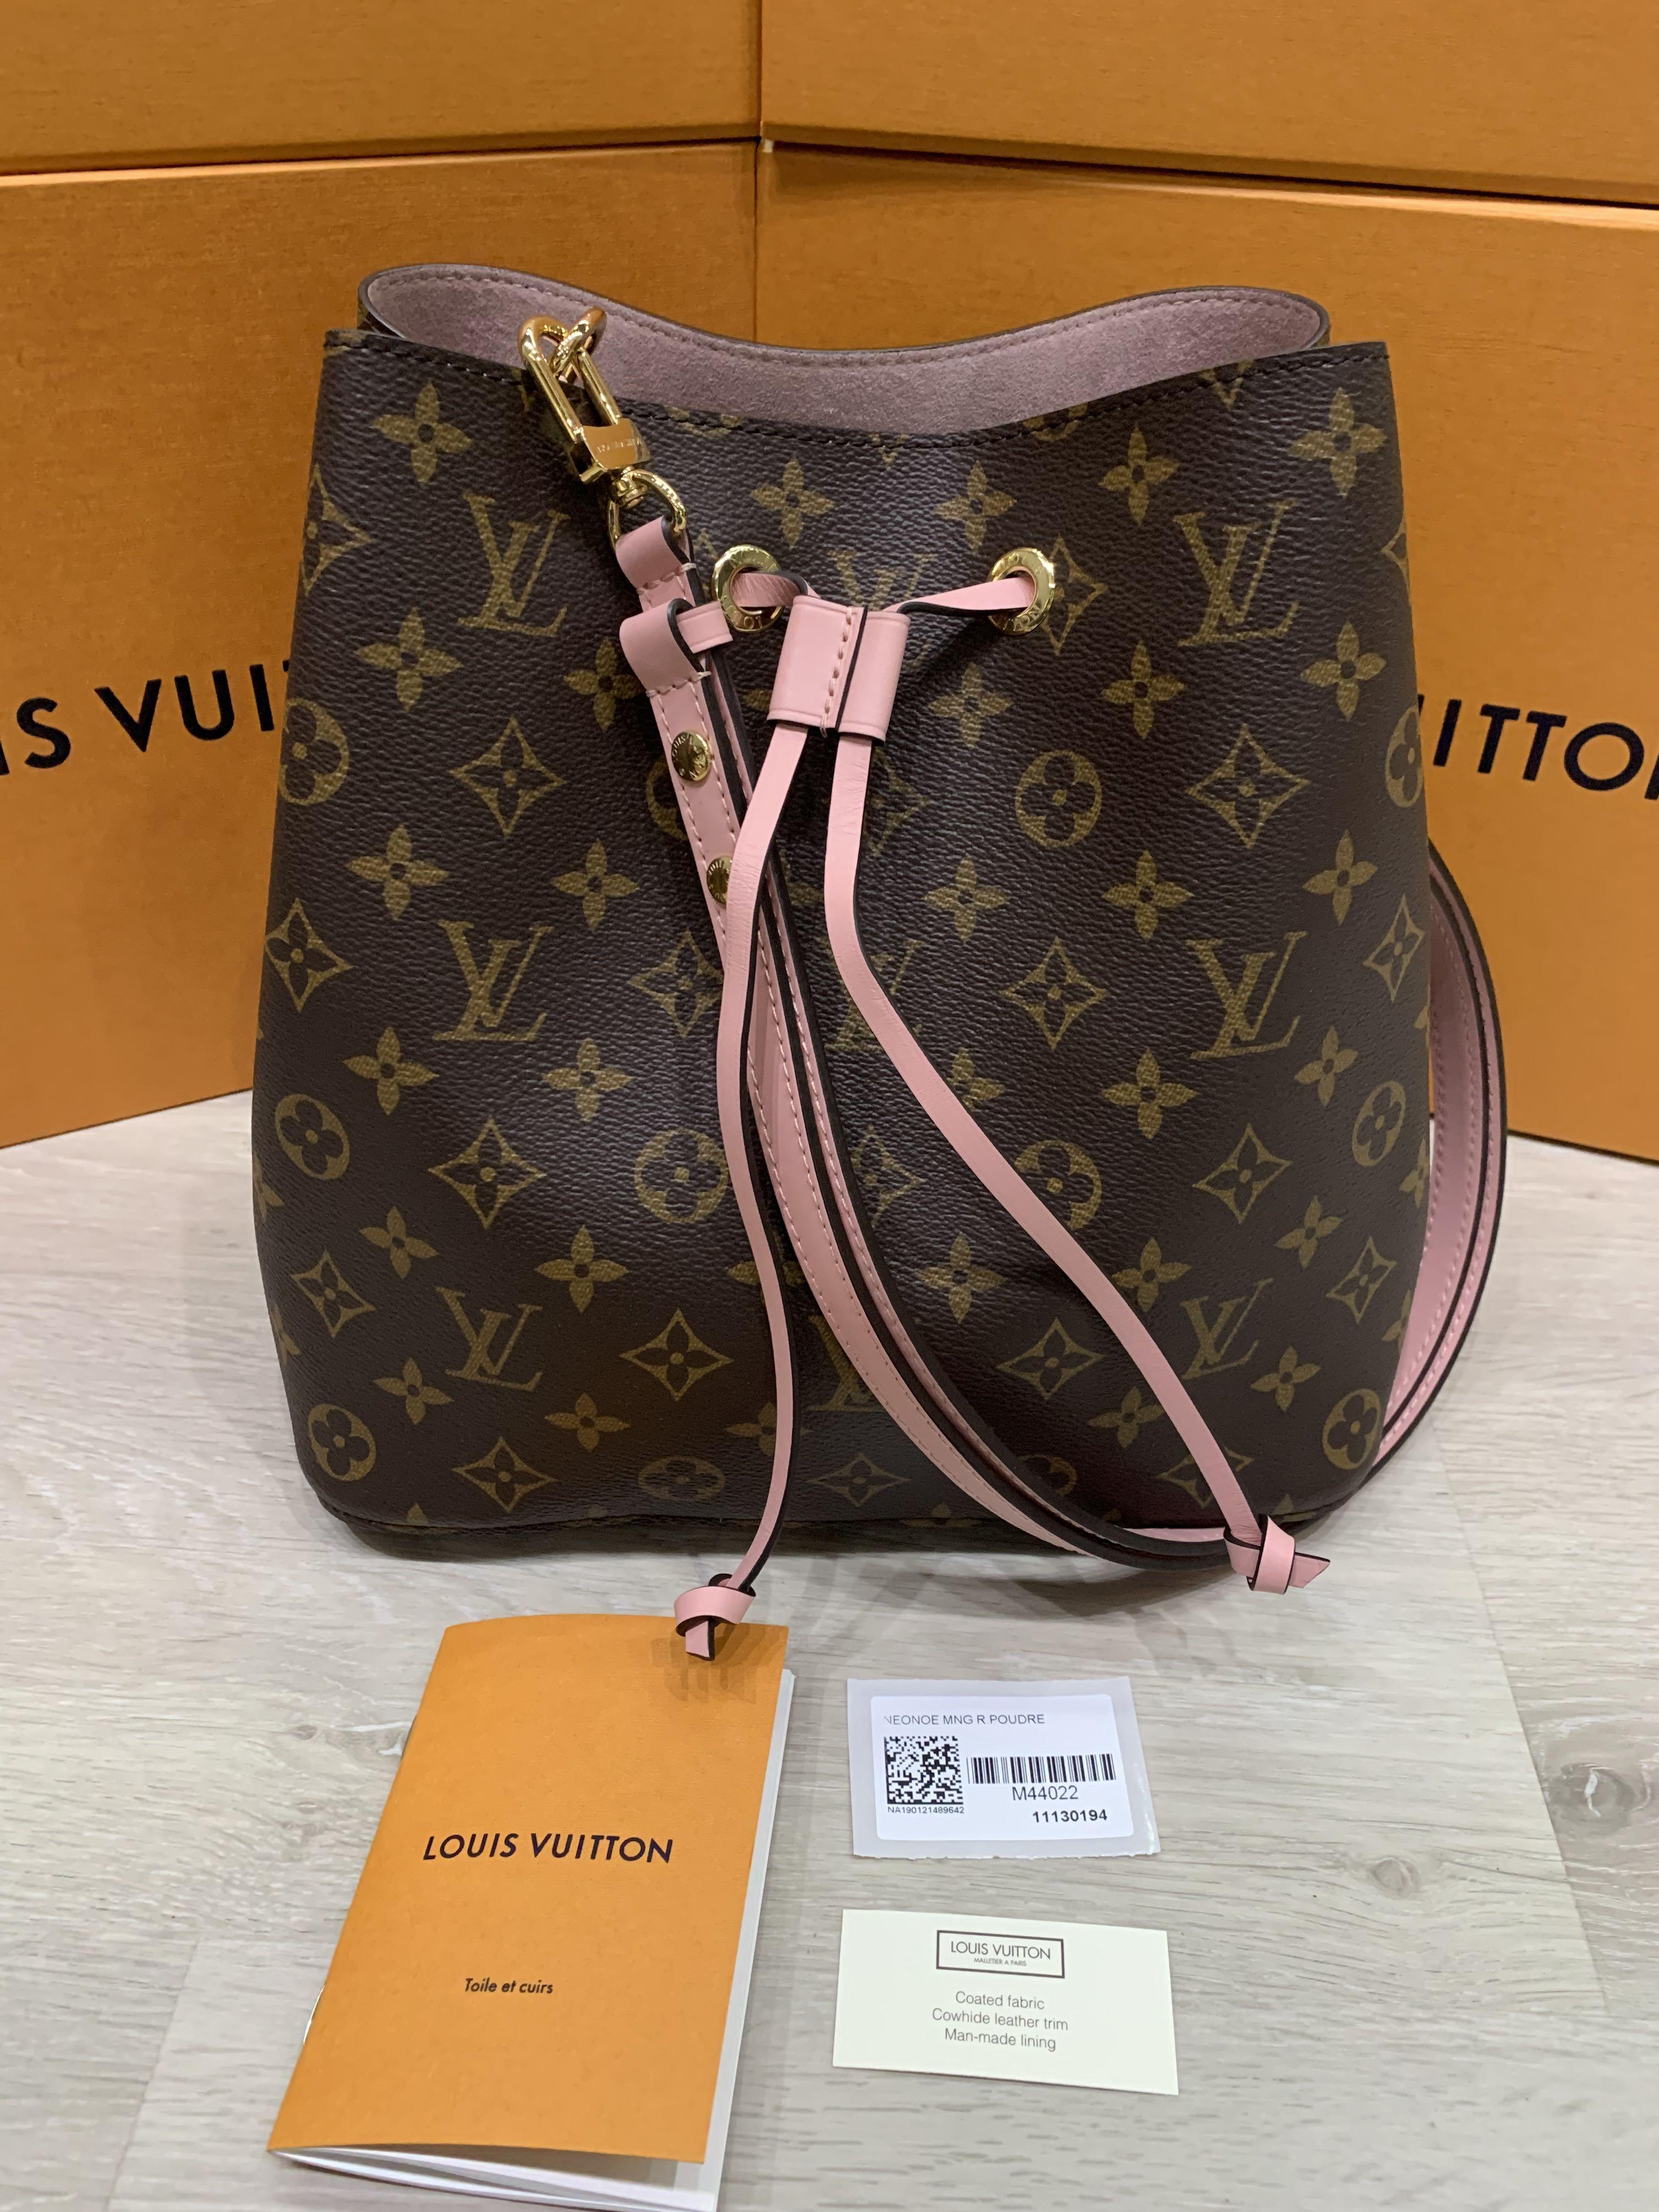 Which NeoNoe is your favorite? : r/Louisvuitton